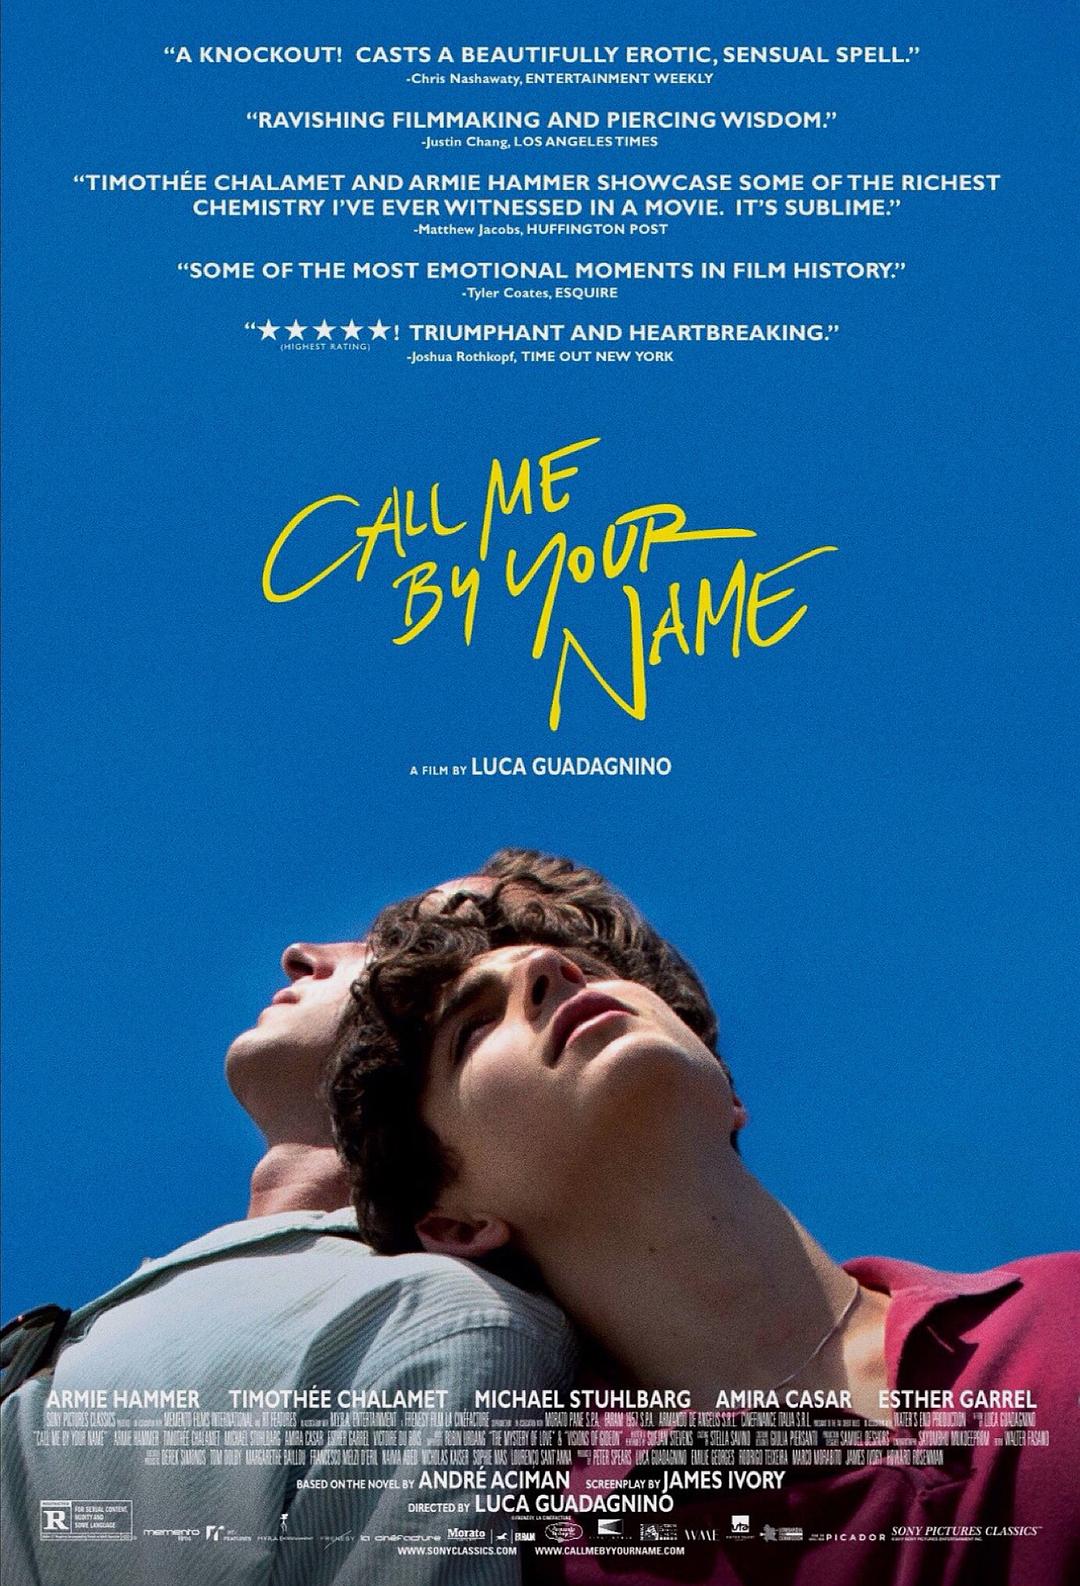 ֺ Call.Me.by.Your.Name.2017.1080p.BluRay.x264.DTS-HD.MA.5.1-FGT 11.49GB-1.png